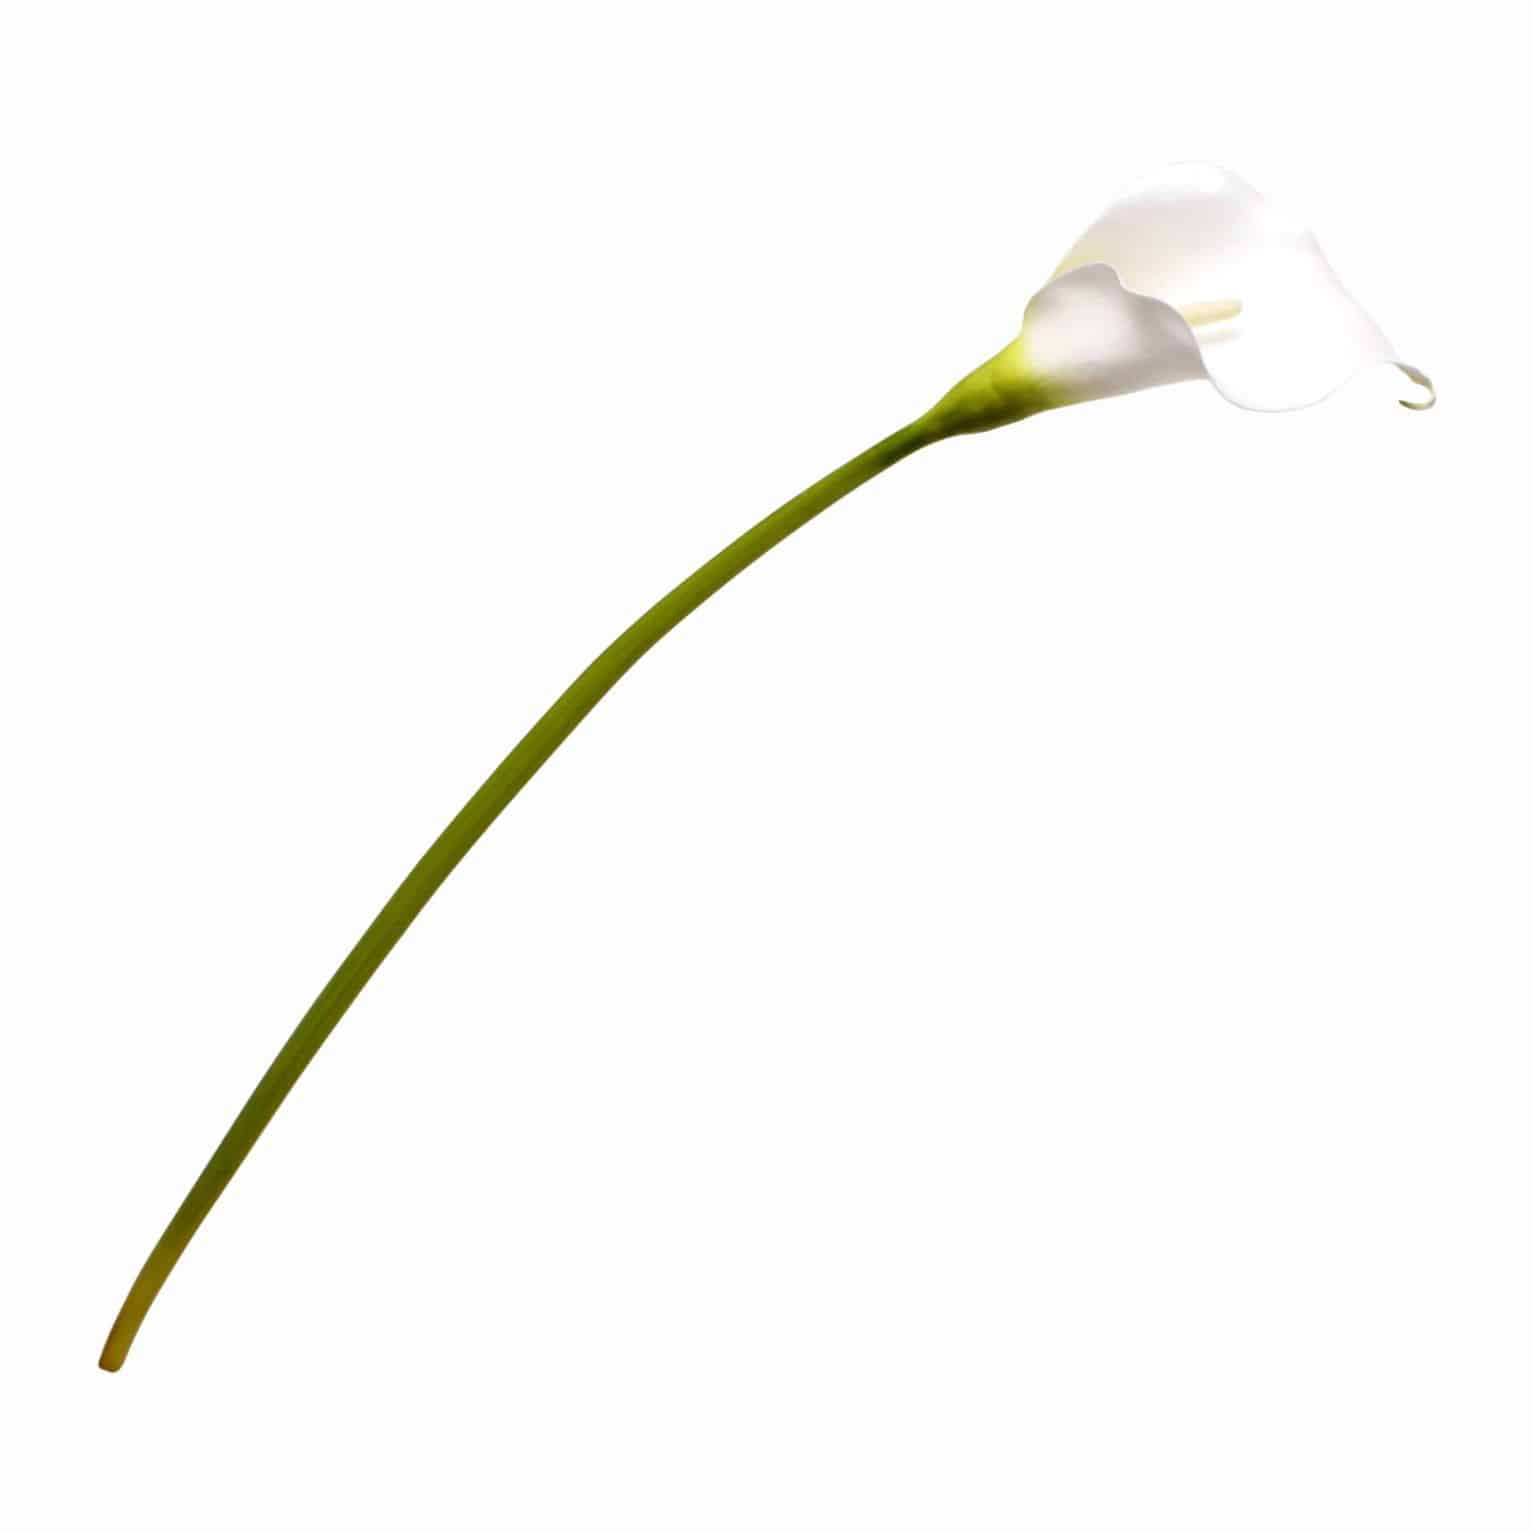 Buy our finest silk lily stem. This calla lily is a true match for the fresh flower. Green stem blends into pure white head. Excellent for your modern arrangements.